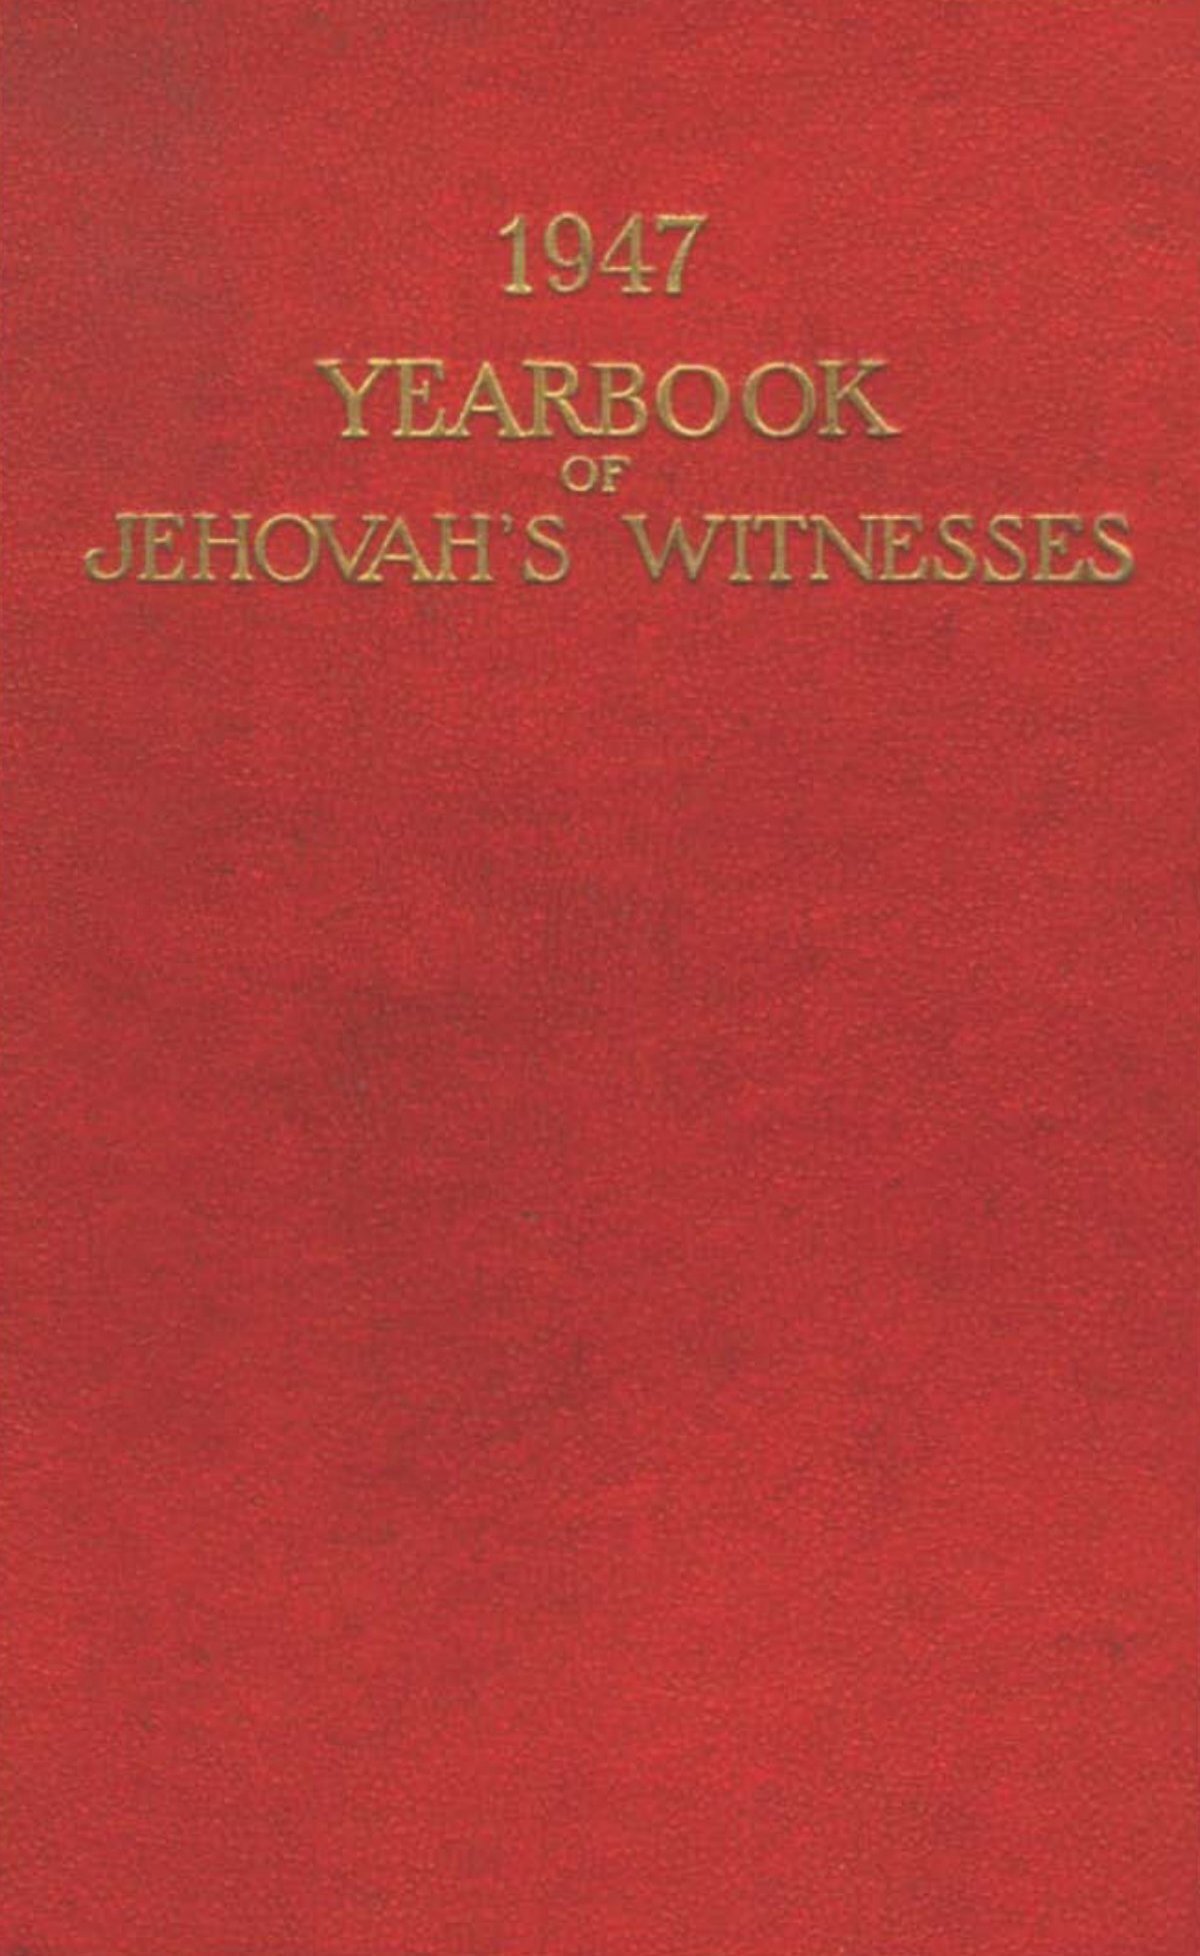 1947 yearbook - Watchtower Archive